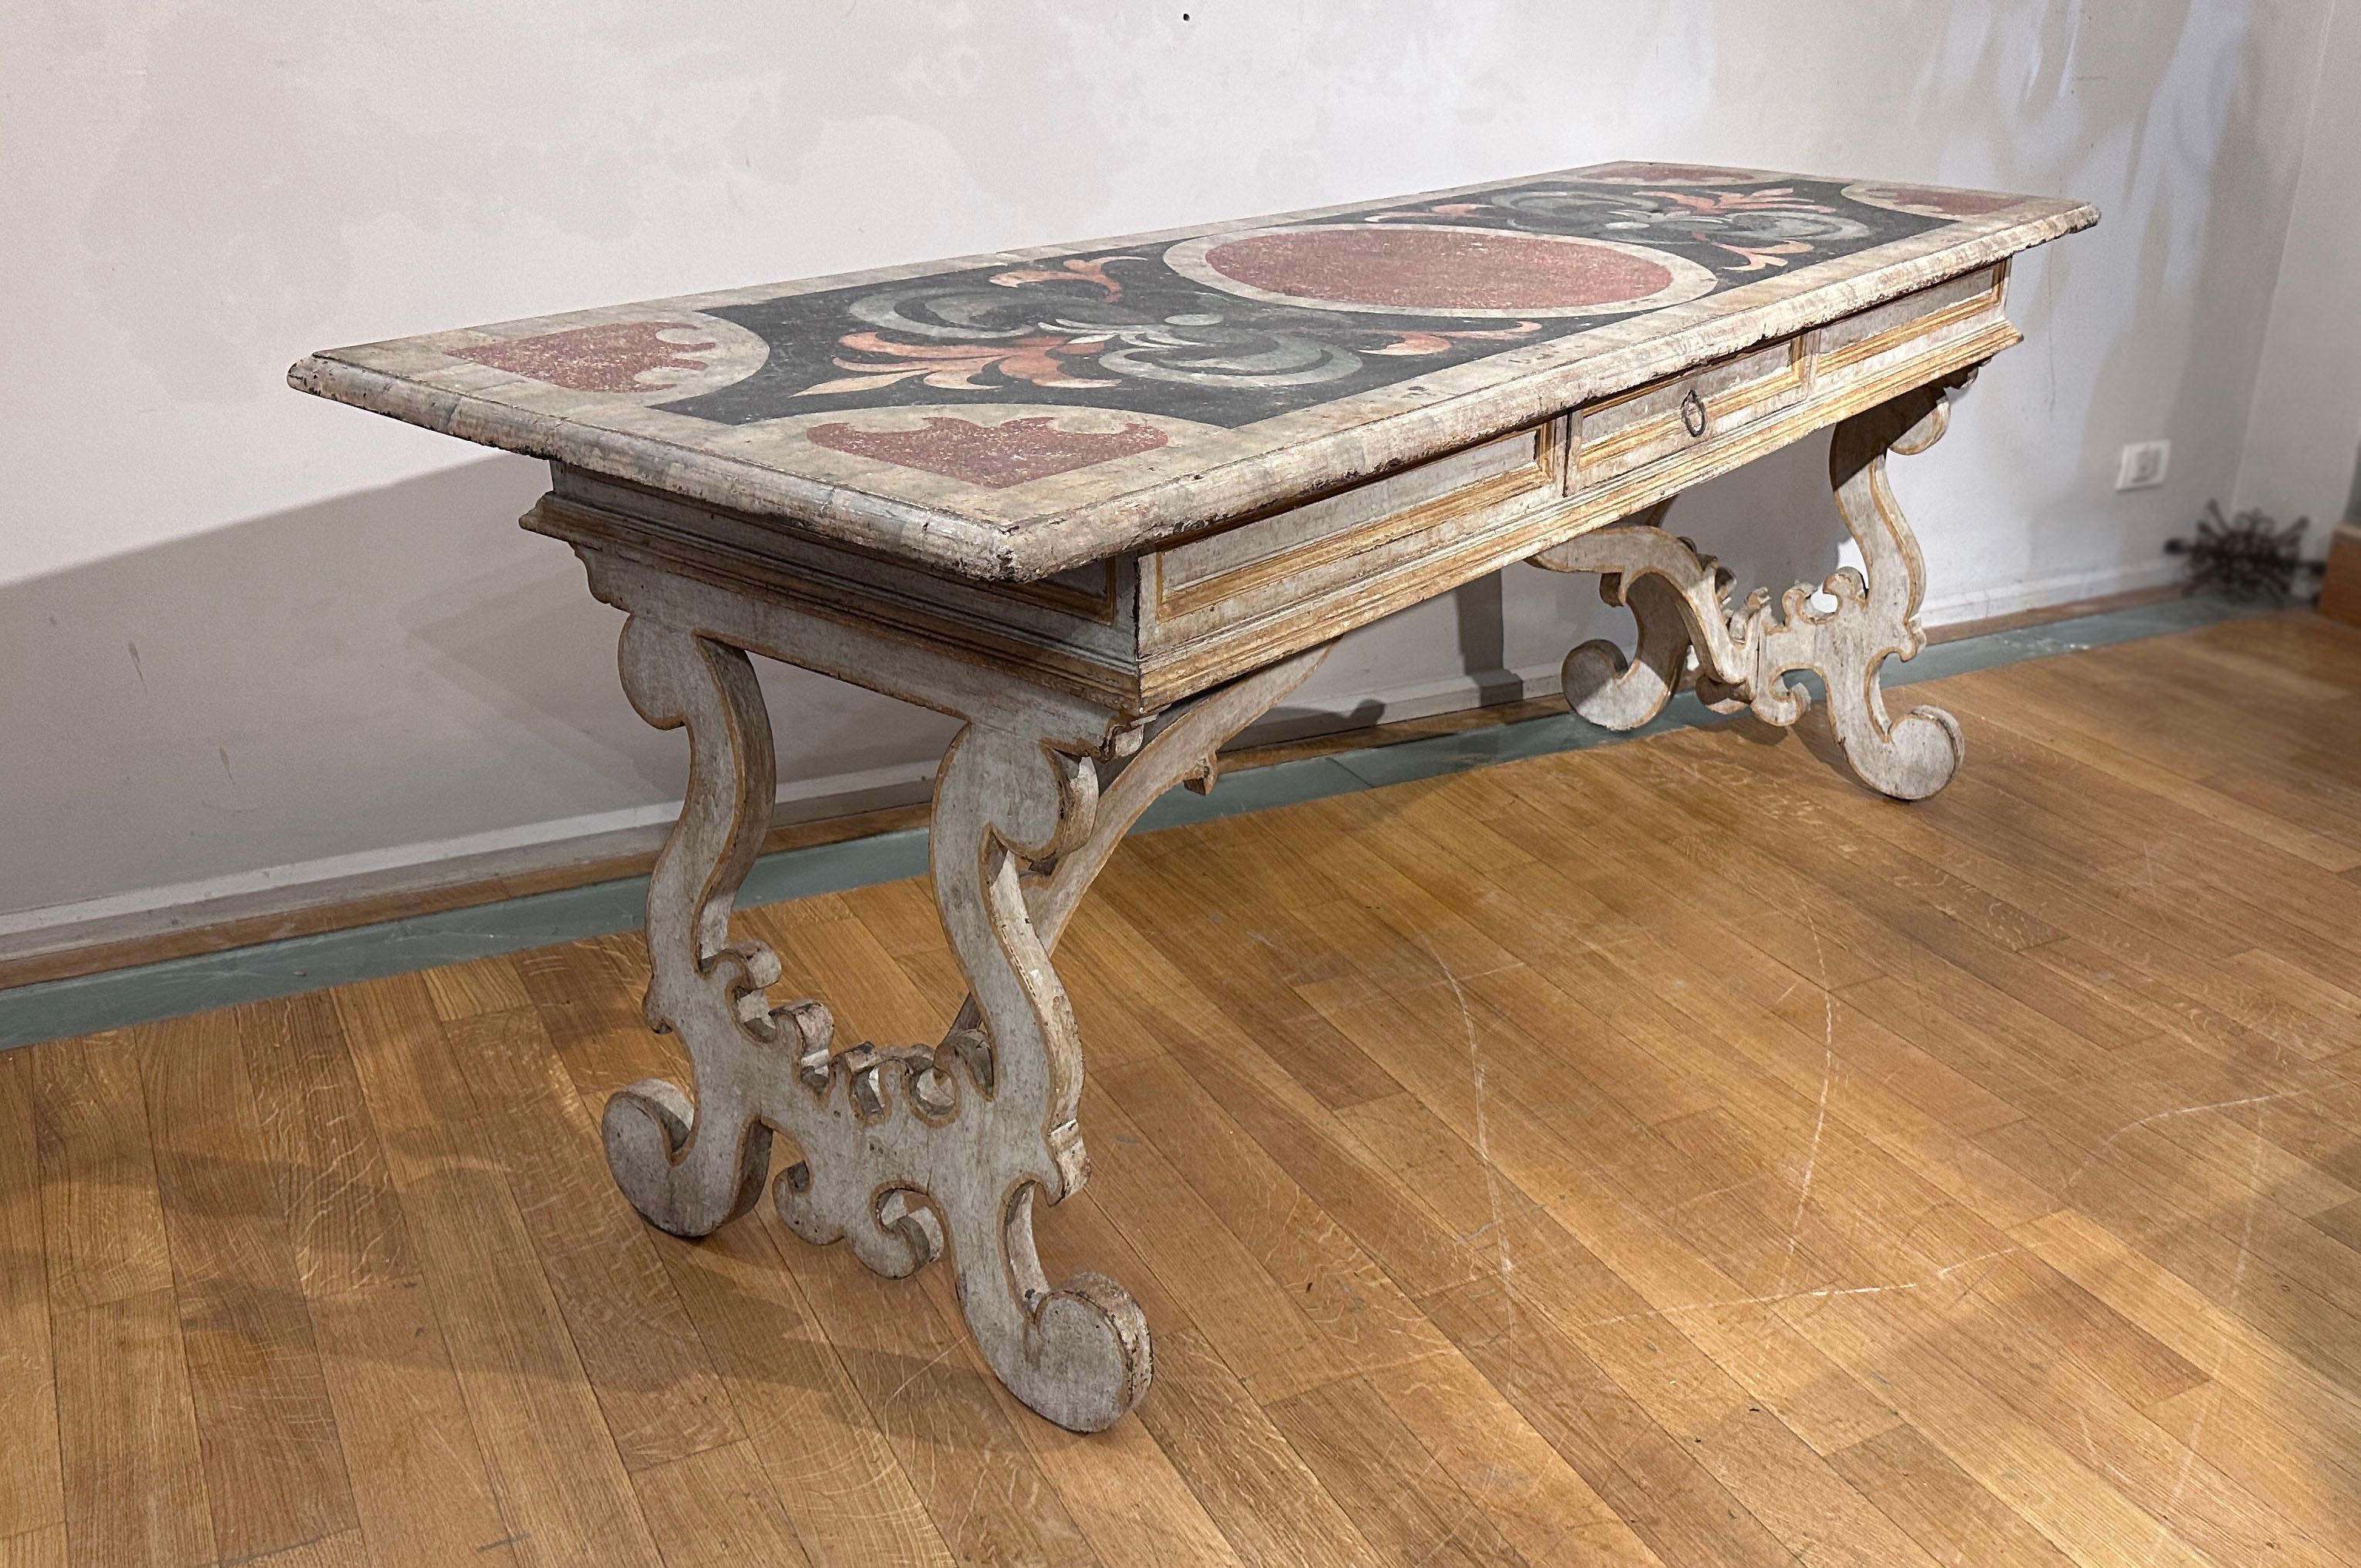 Italian END OF THE 17th CENTURY WOODEN TABLE PAINTED AS MARBLE INLAYS